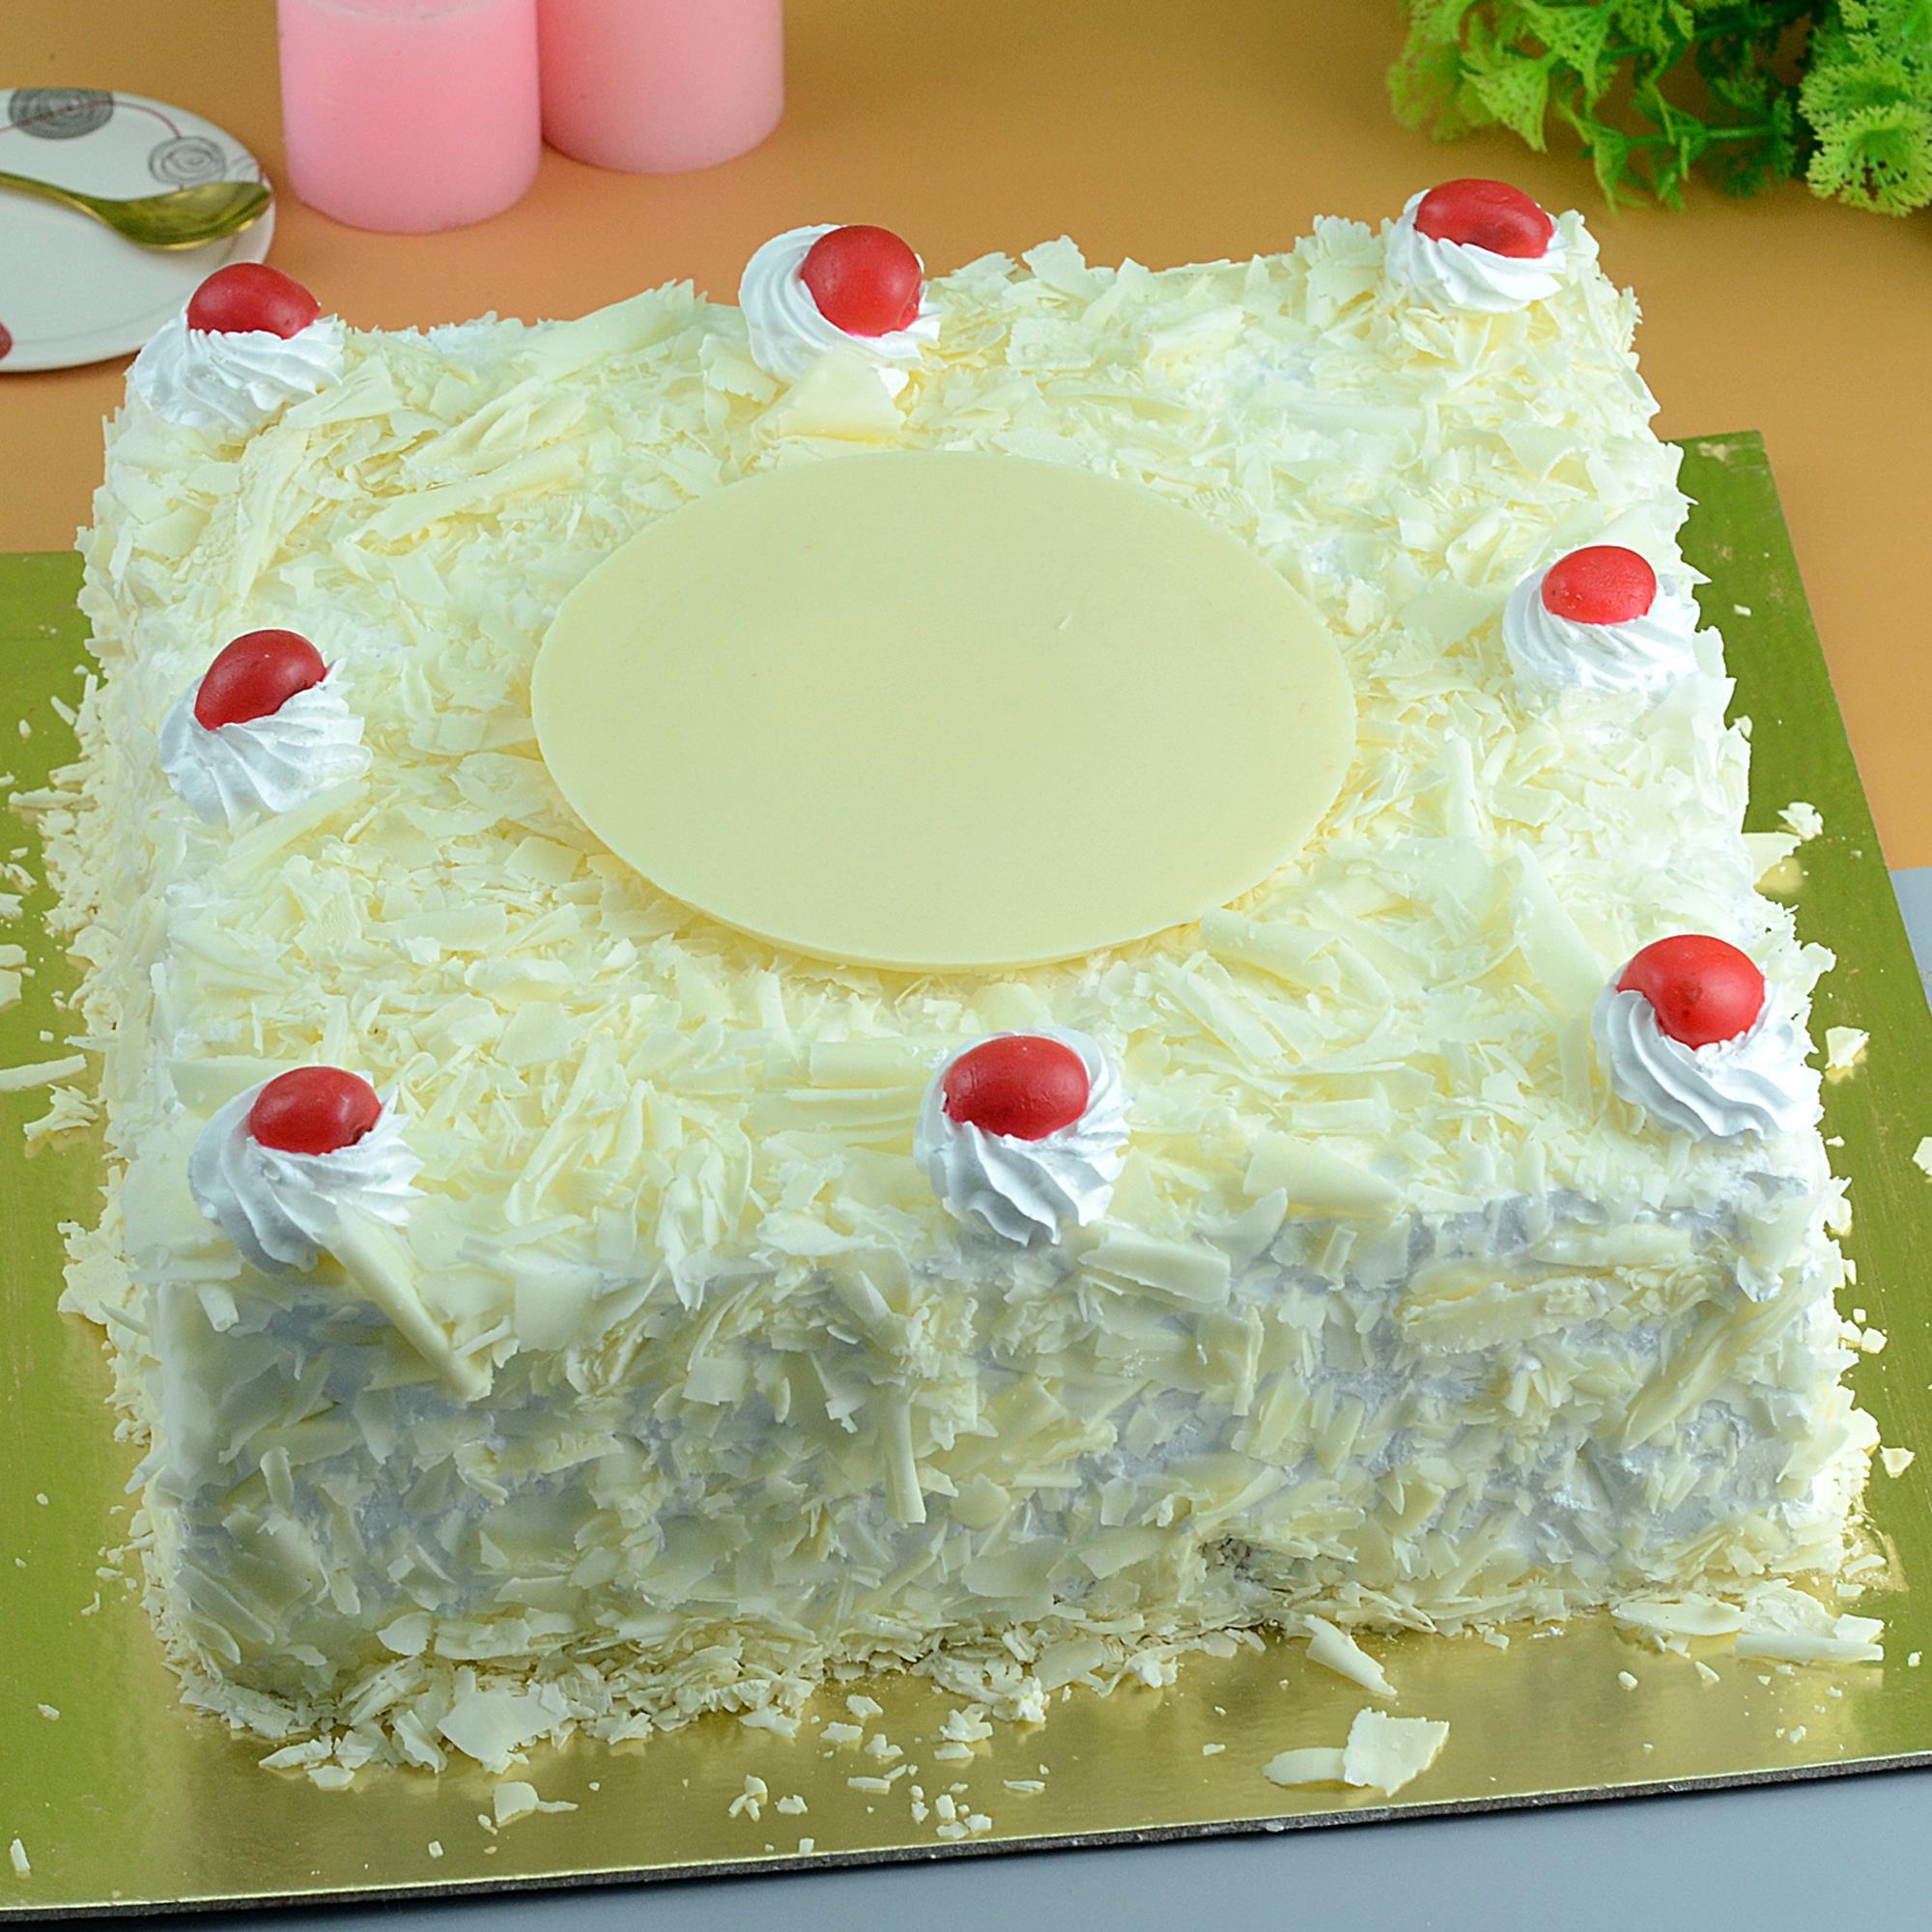 Quality Wedding Cakes to Visakhapatnam | Order Online Special Cakes to Vizag